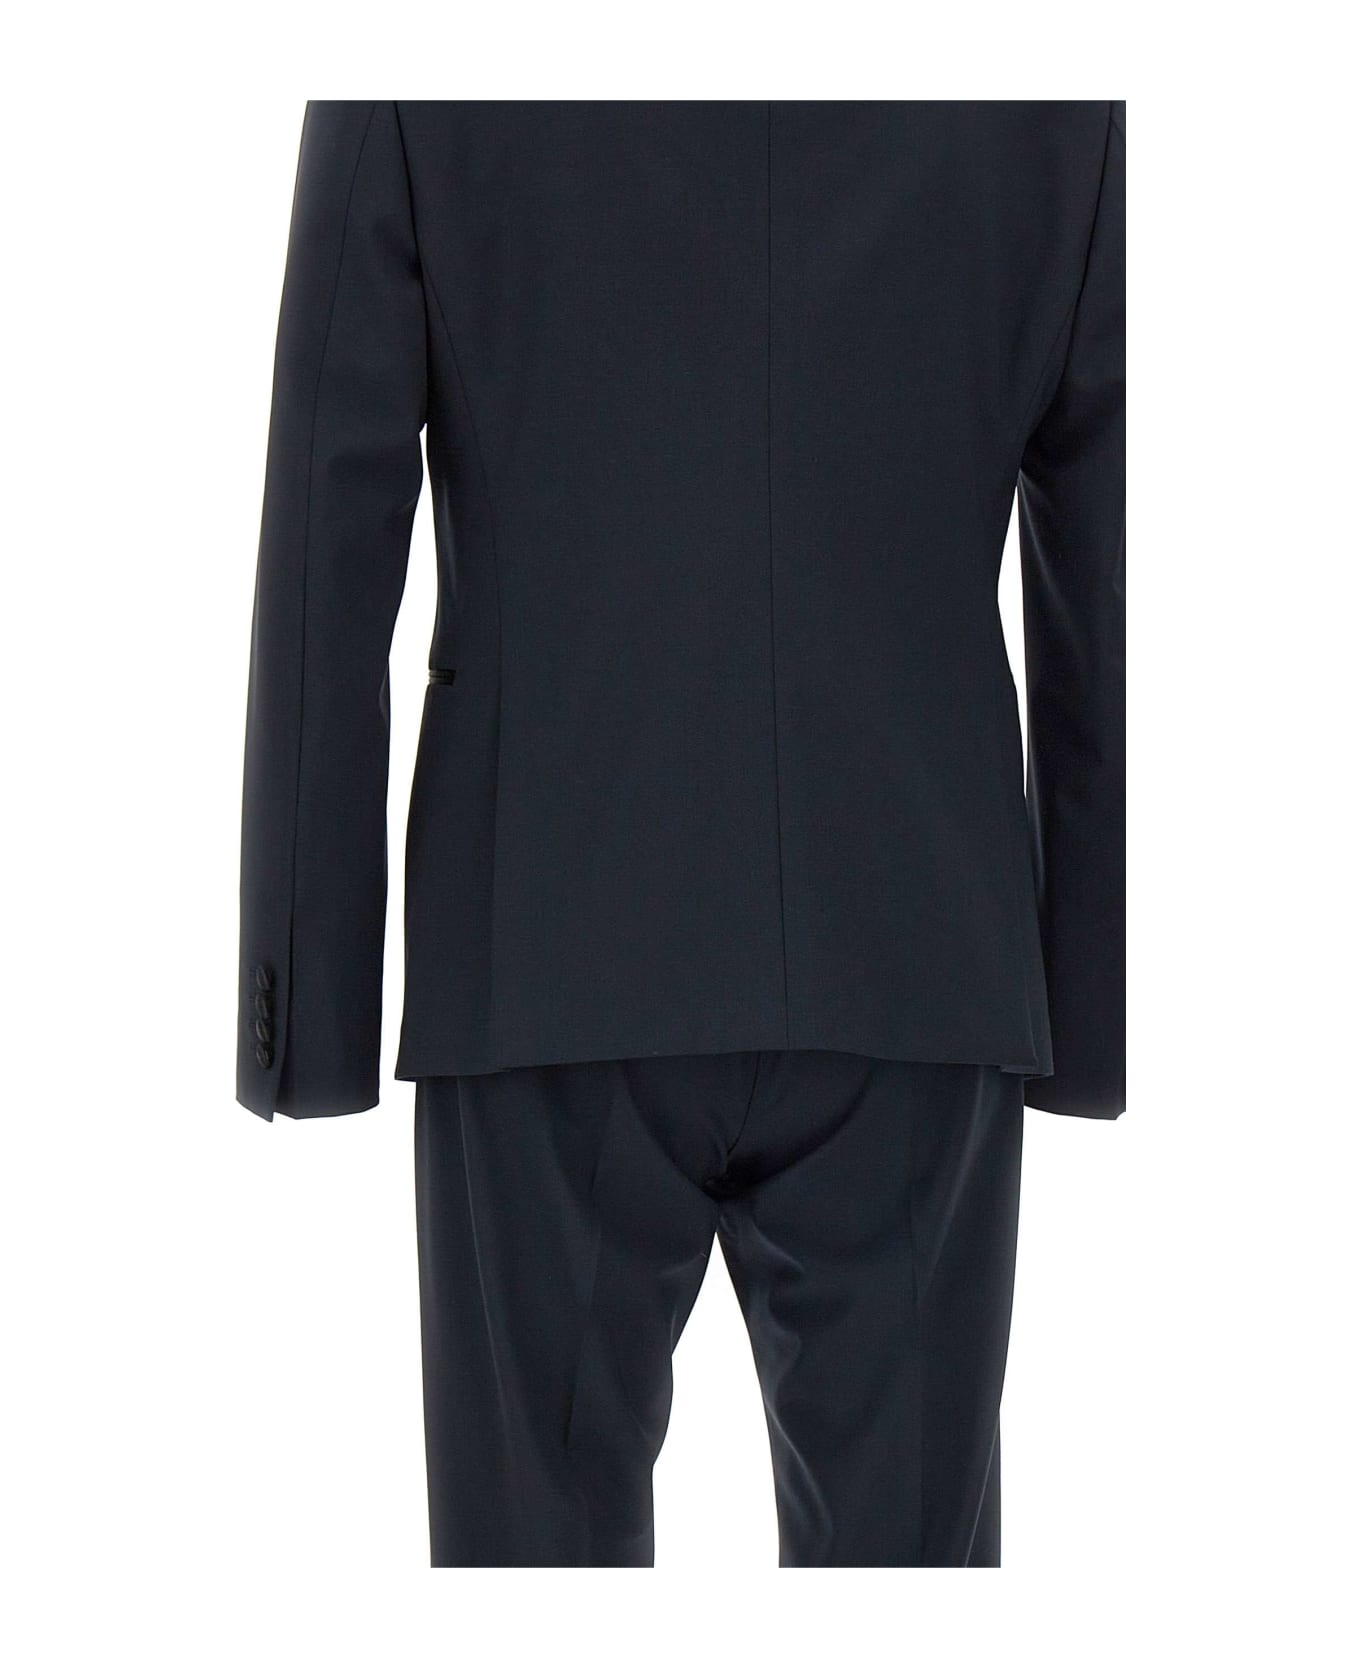 Emporio Armani Fresh Wool Two-piece Formal Suit - Navy